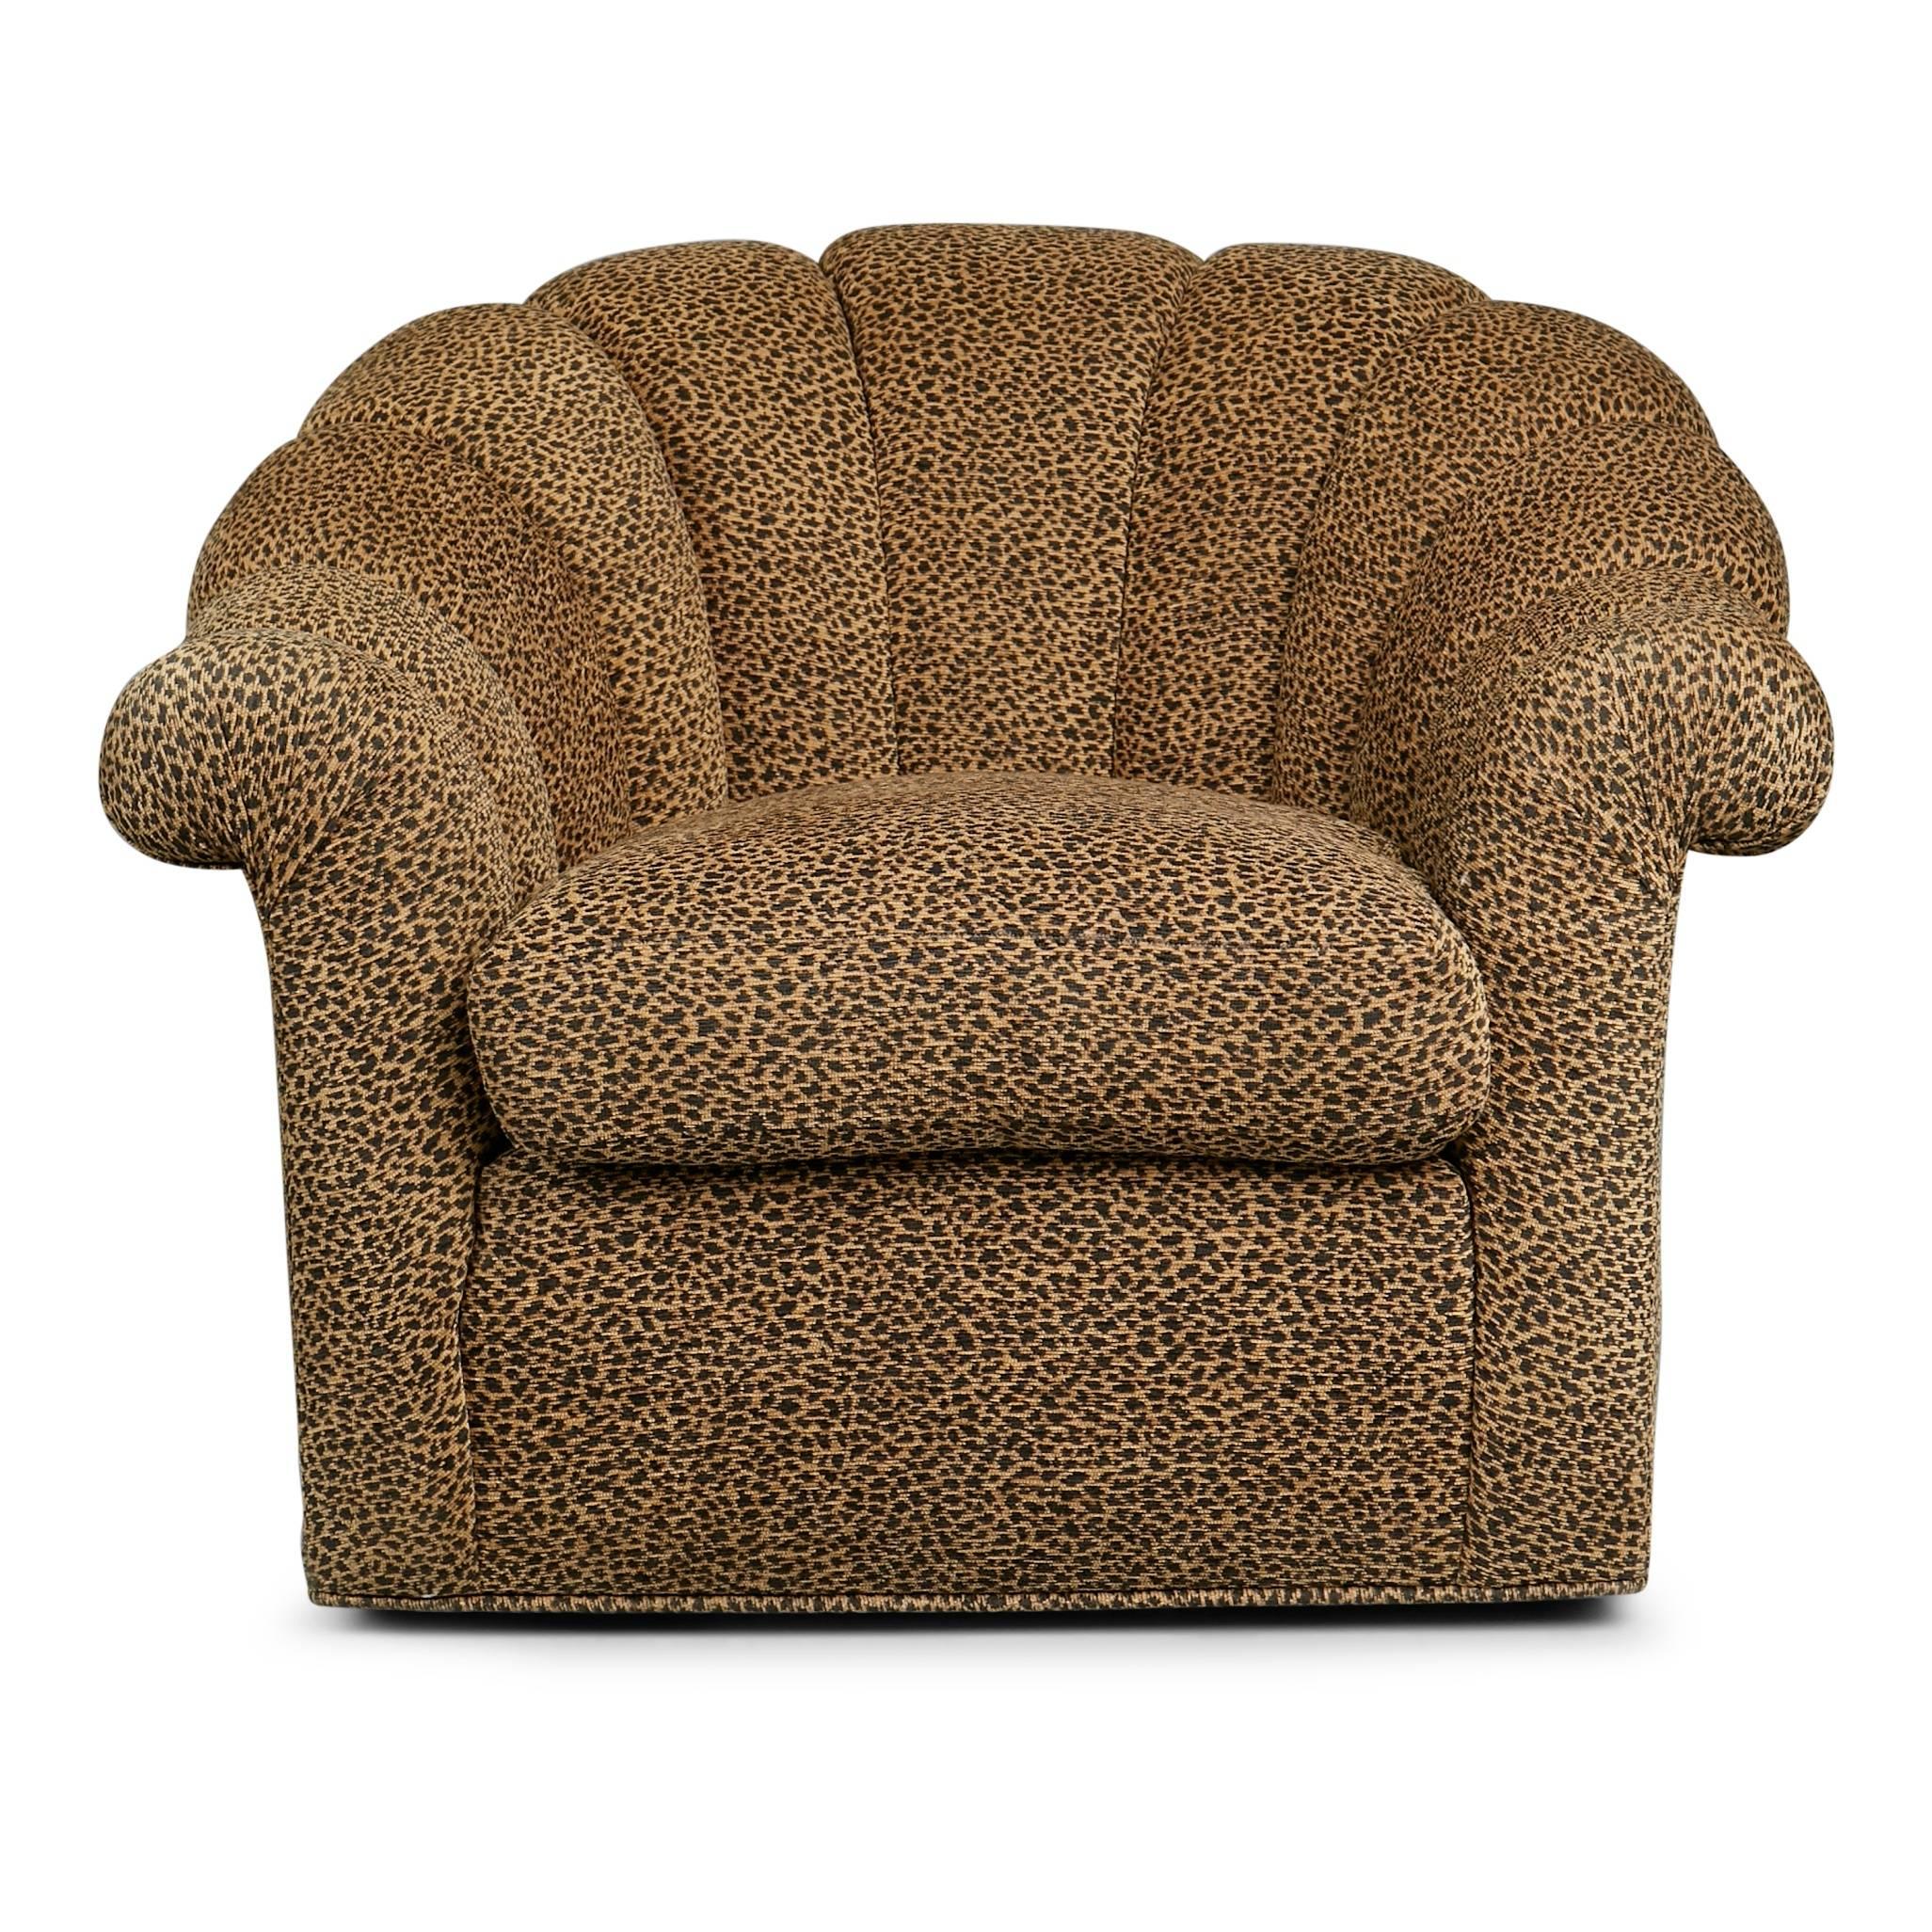 Pair of generously proportioned Art Deco style swivel chairs. These club chairs feature sculpturally flared backs and arms which have been channel tufted and upholstered in a fun leopard print chenille-like fabric. These armchairs swivel, allowing